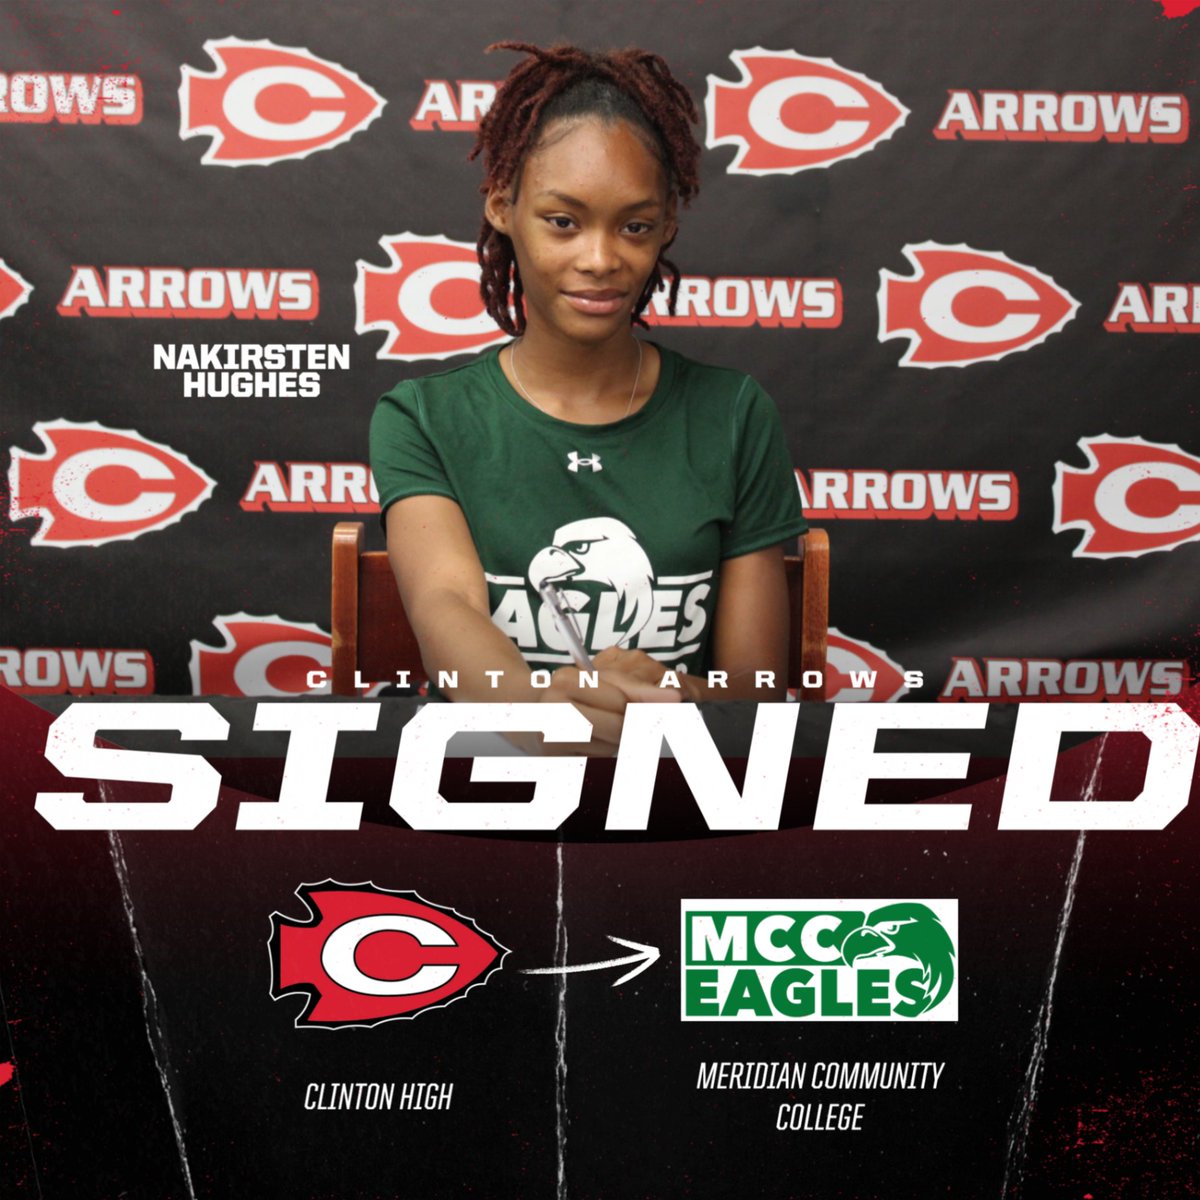 This morning, Senior Sprinter Nakirsten Hughes signed a National Letter of Intent to continue her career at Meridian Community College. We are so proud of Nakirsten and we are excited about following her success in the future. @ClintonSchools @WeAreArrowTrack